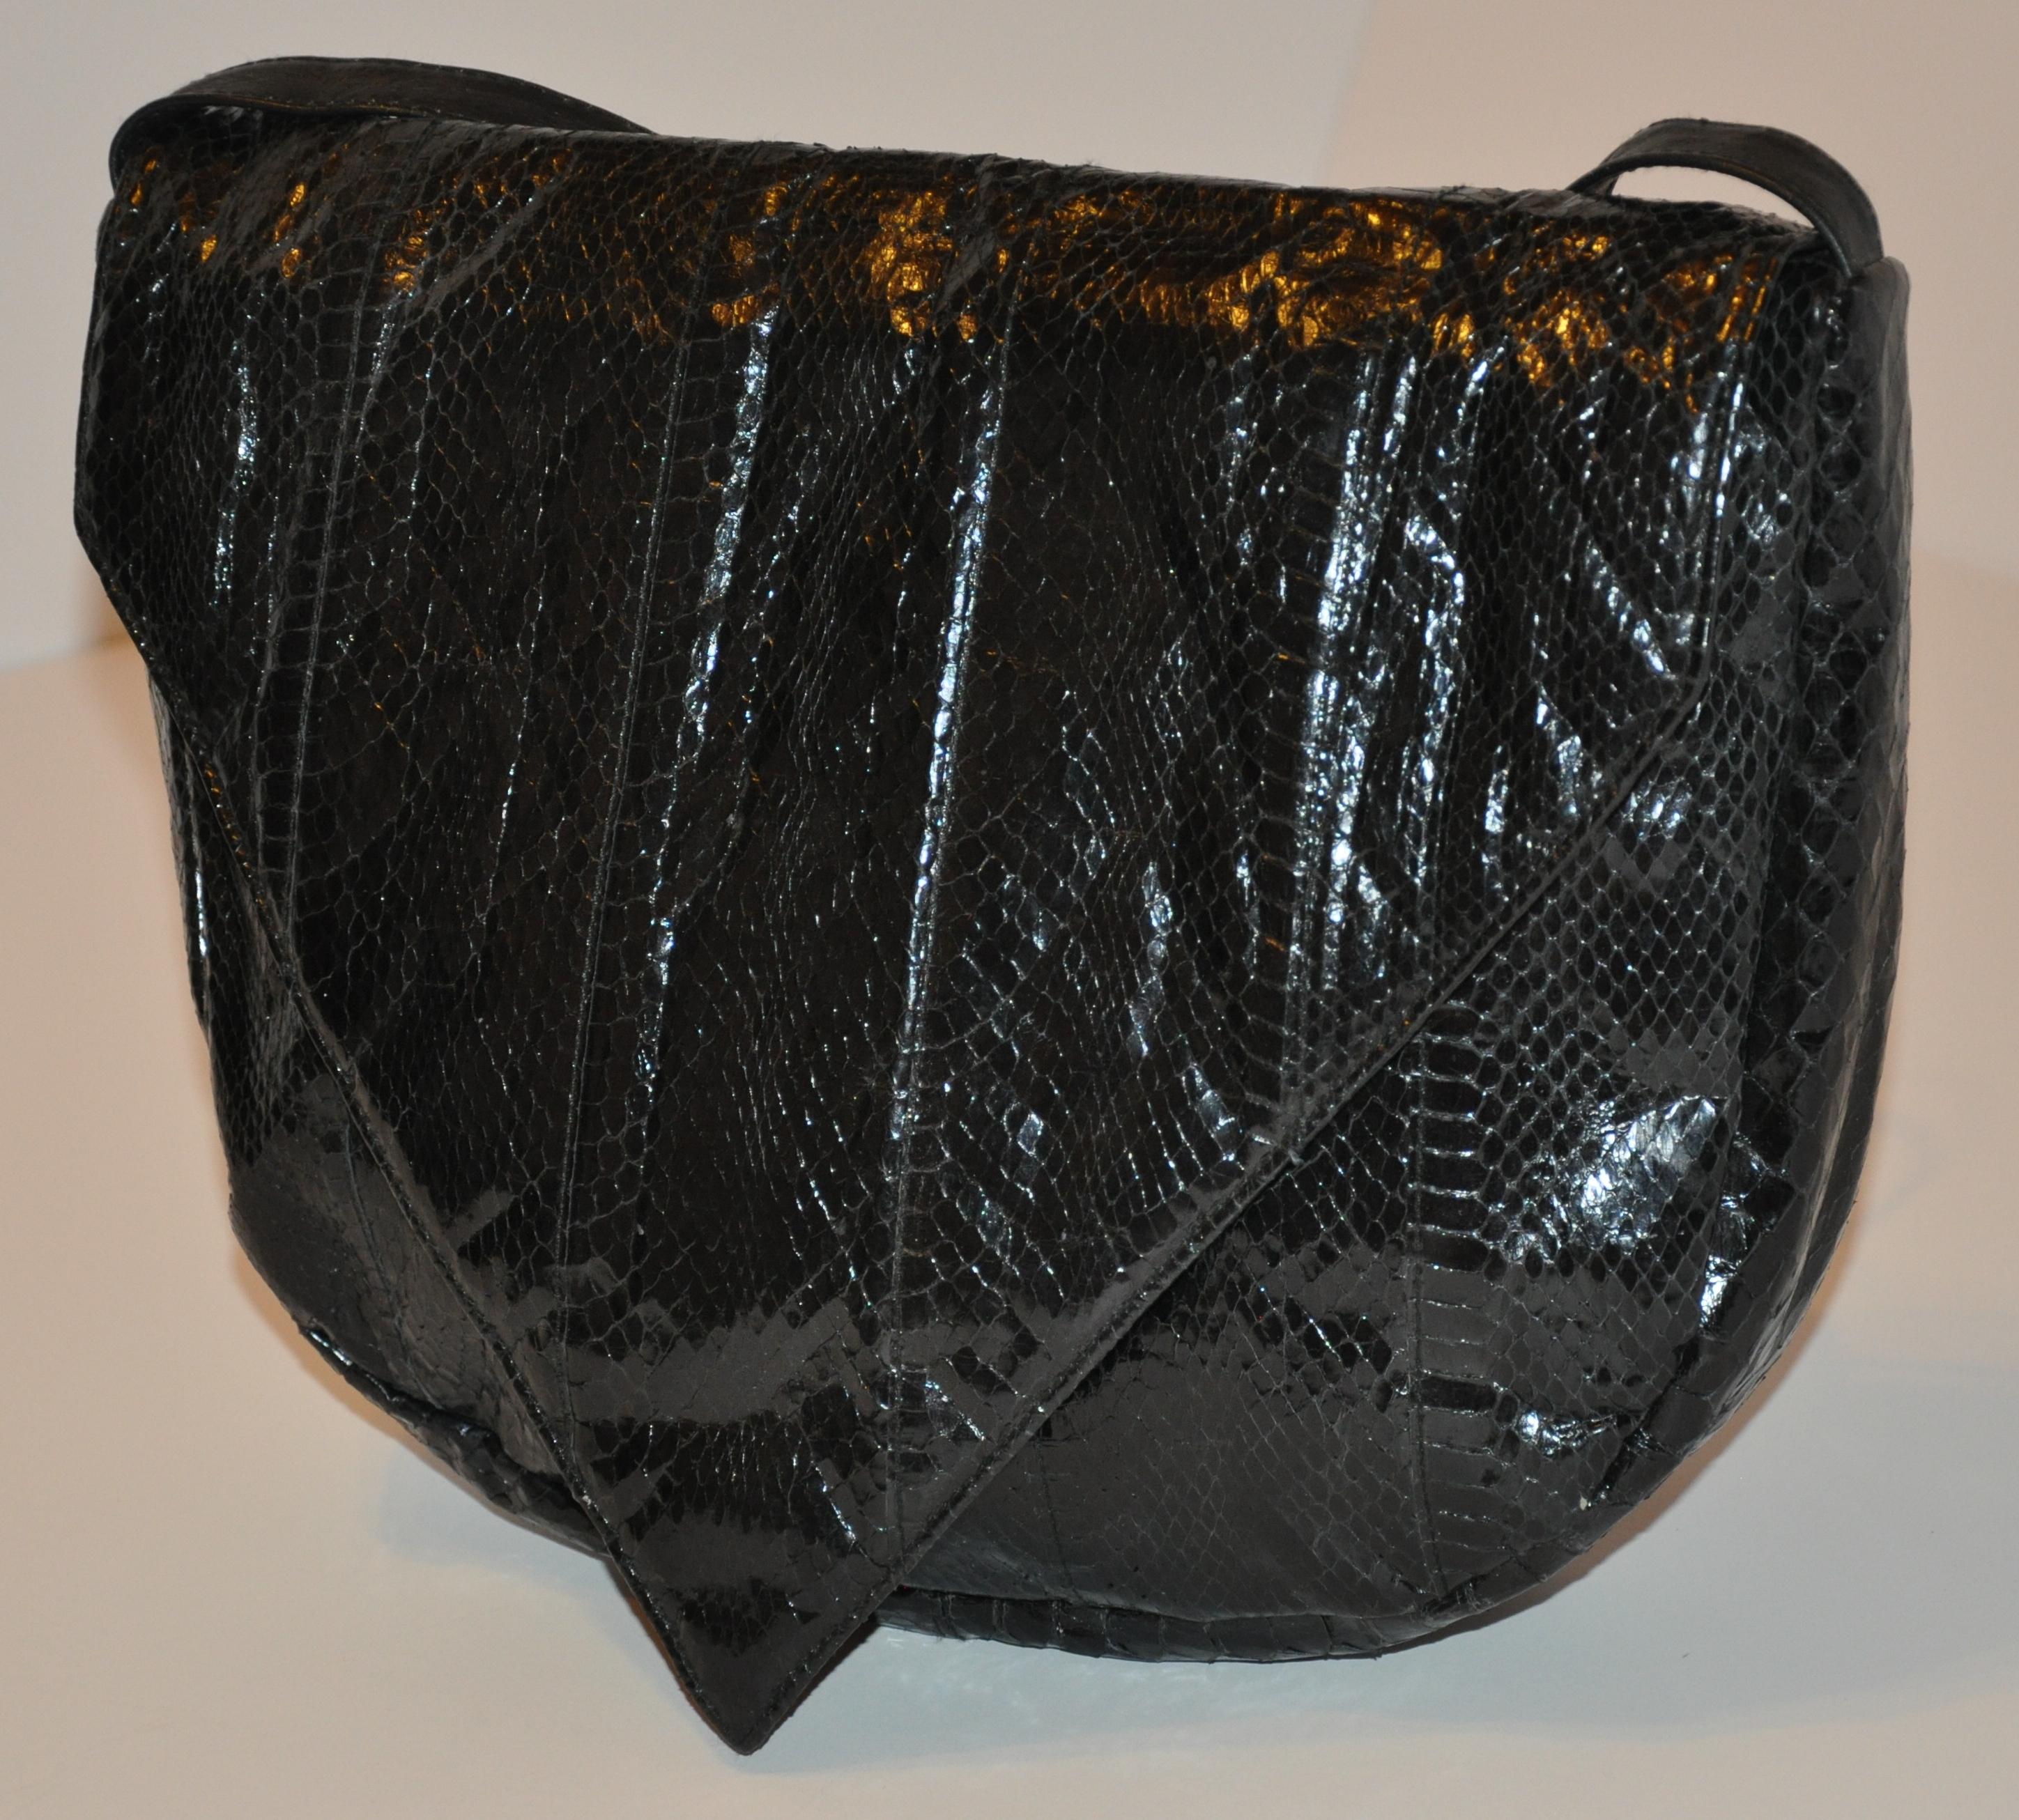        This wonderfully soft huge black snakeskin accented with black calfskin has the option to be used either as a clutch as well as a shoulder bag if desired. The 